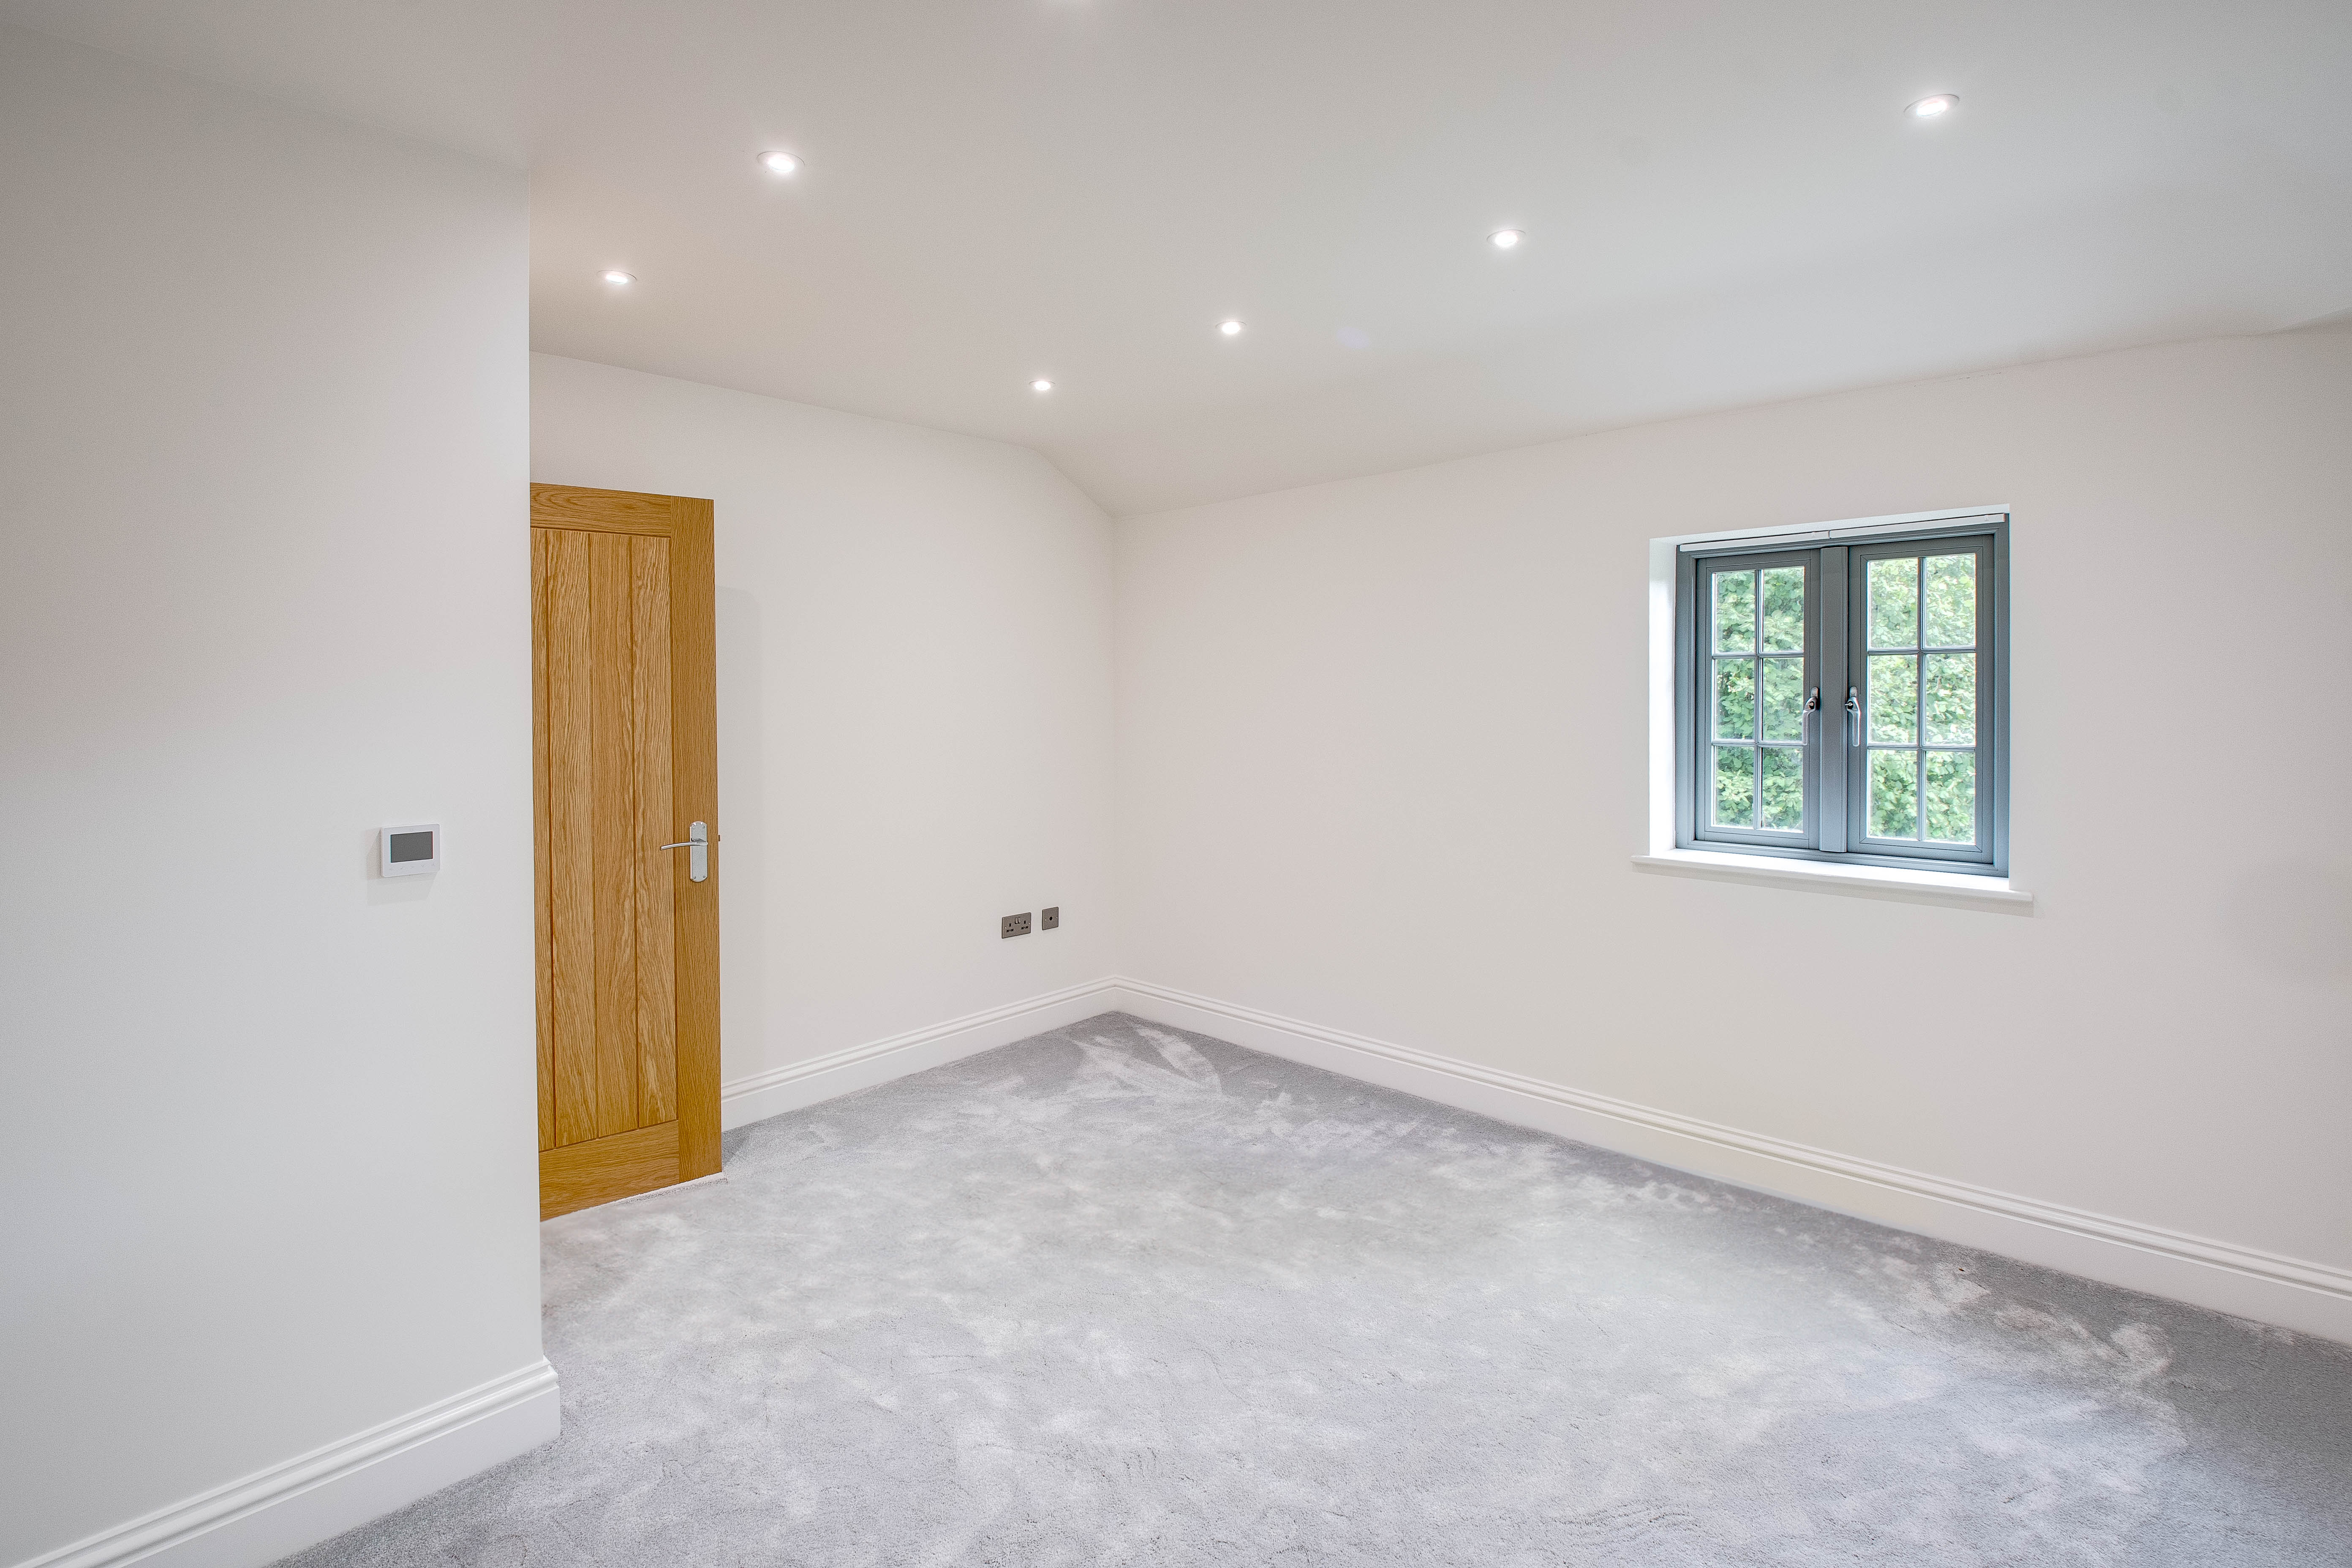 3 bed  for sale in Chadwich Grange, Bromsgrove  - Property Image 9